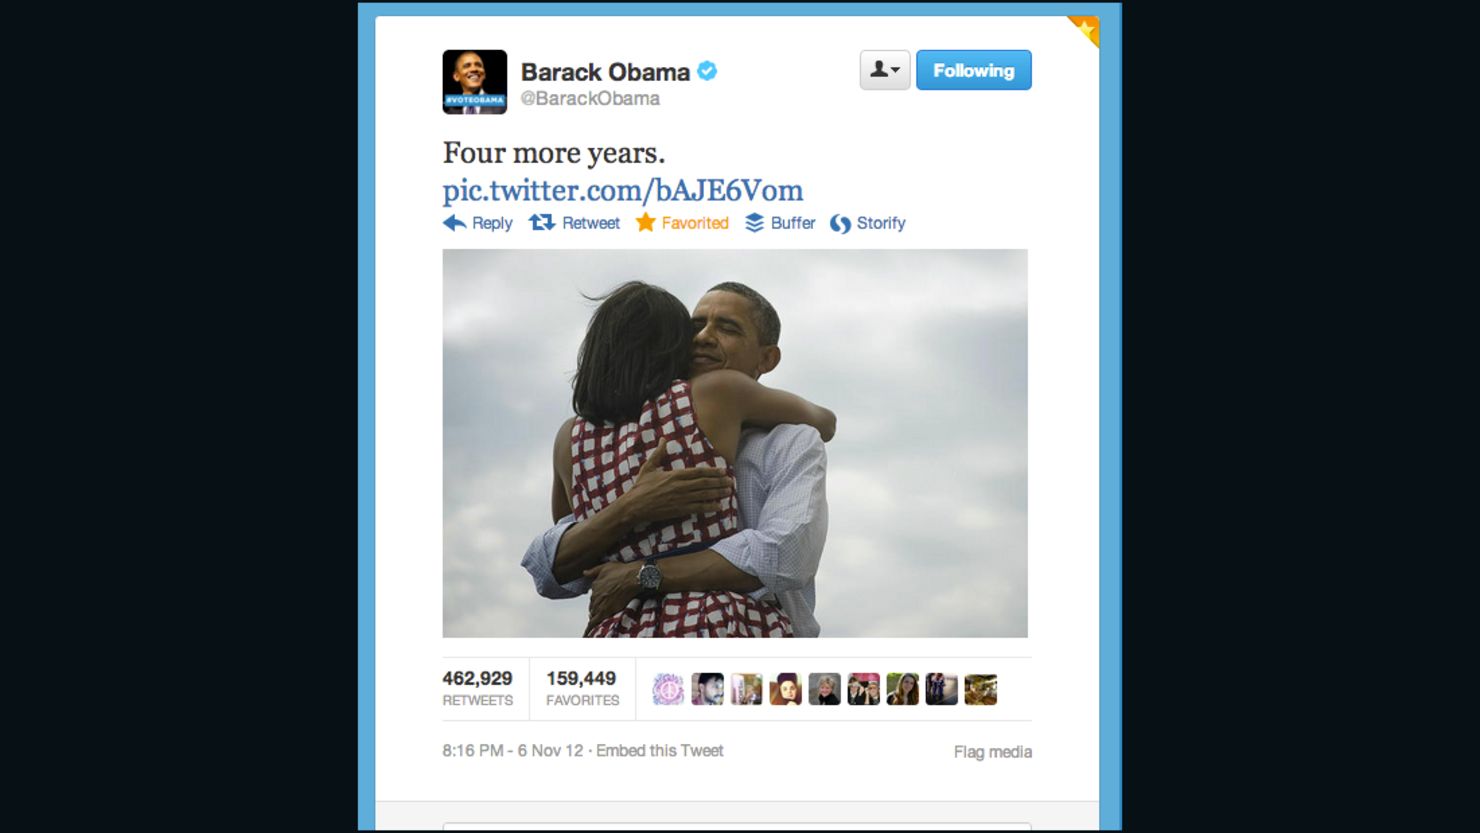                    This tweet by @BarackObama quickly became the most retweeted post of all time